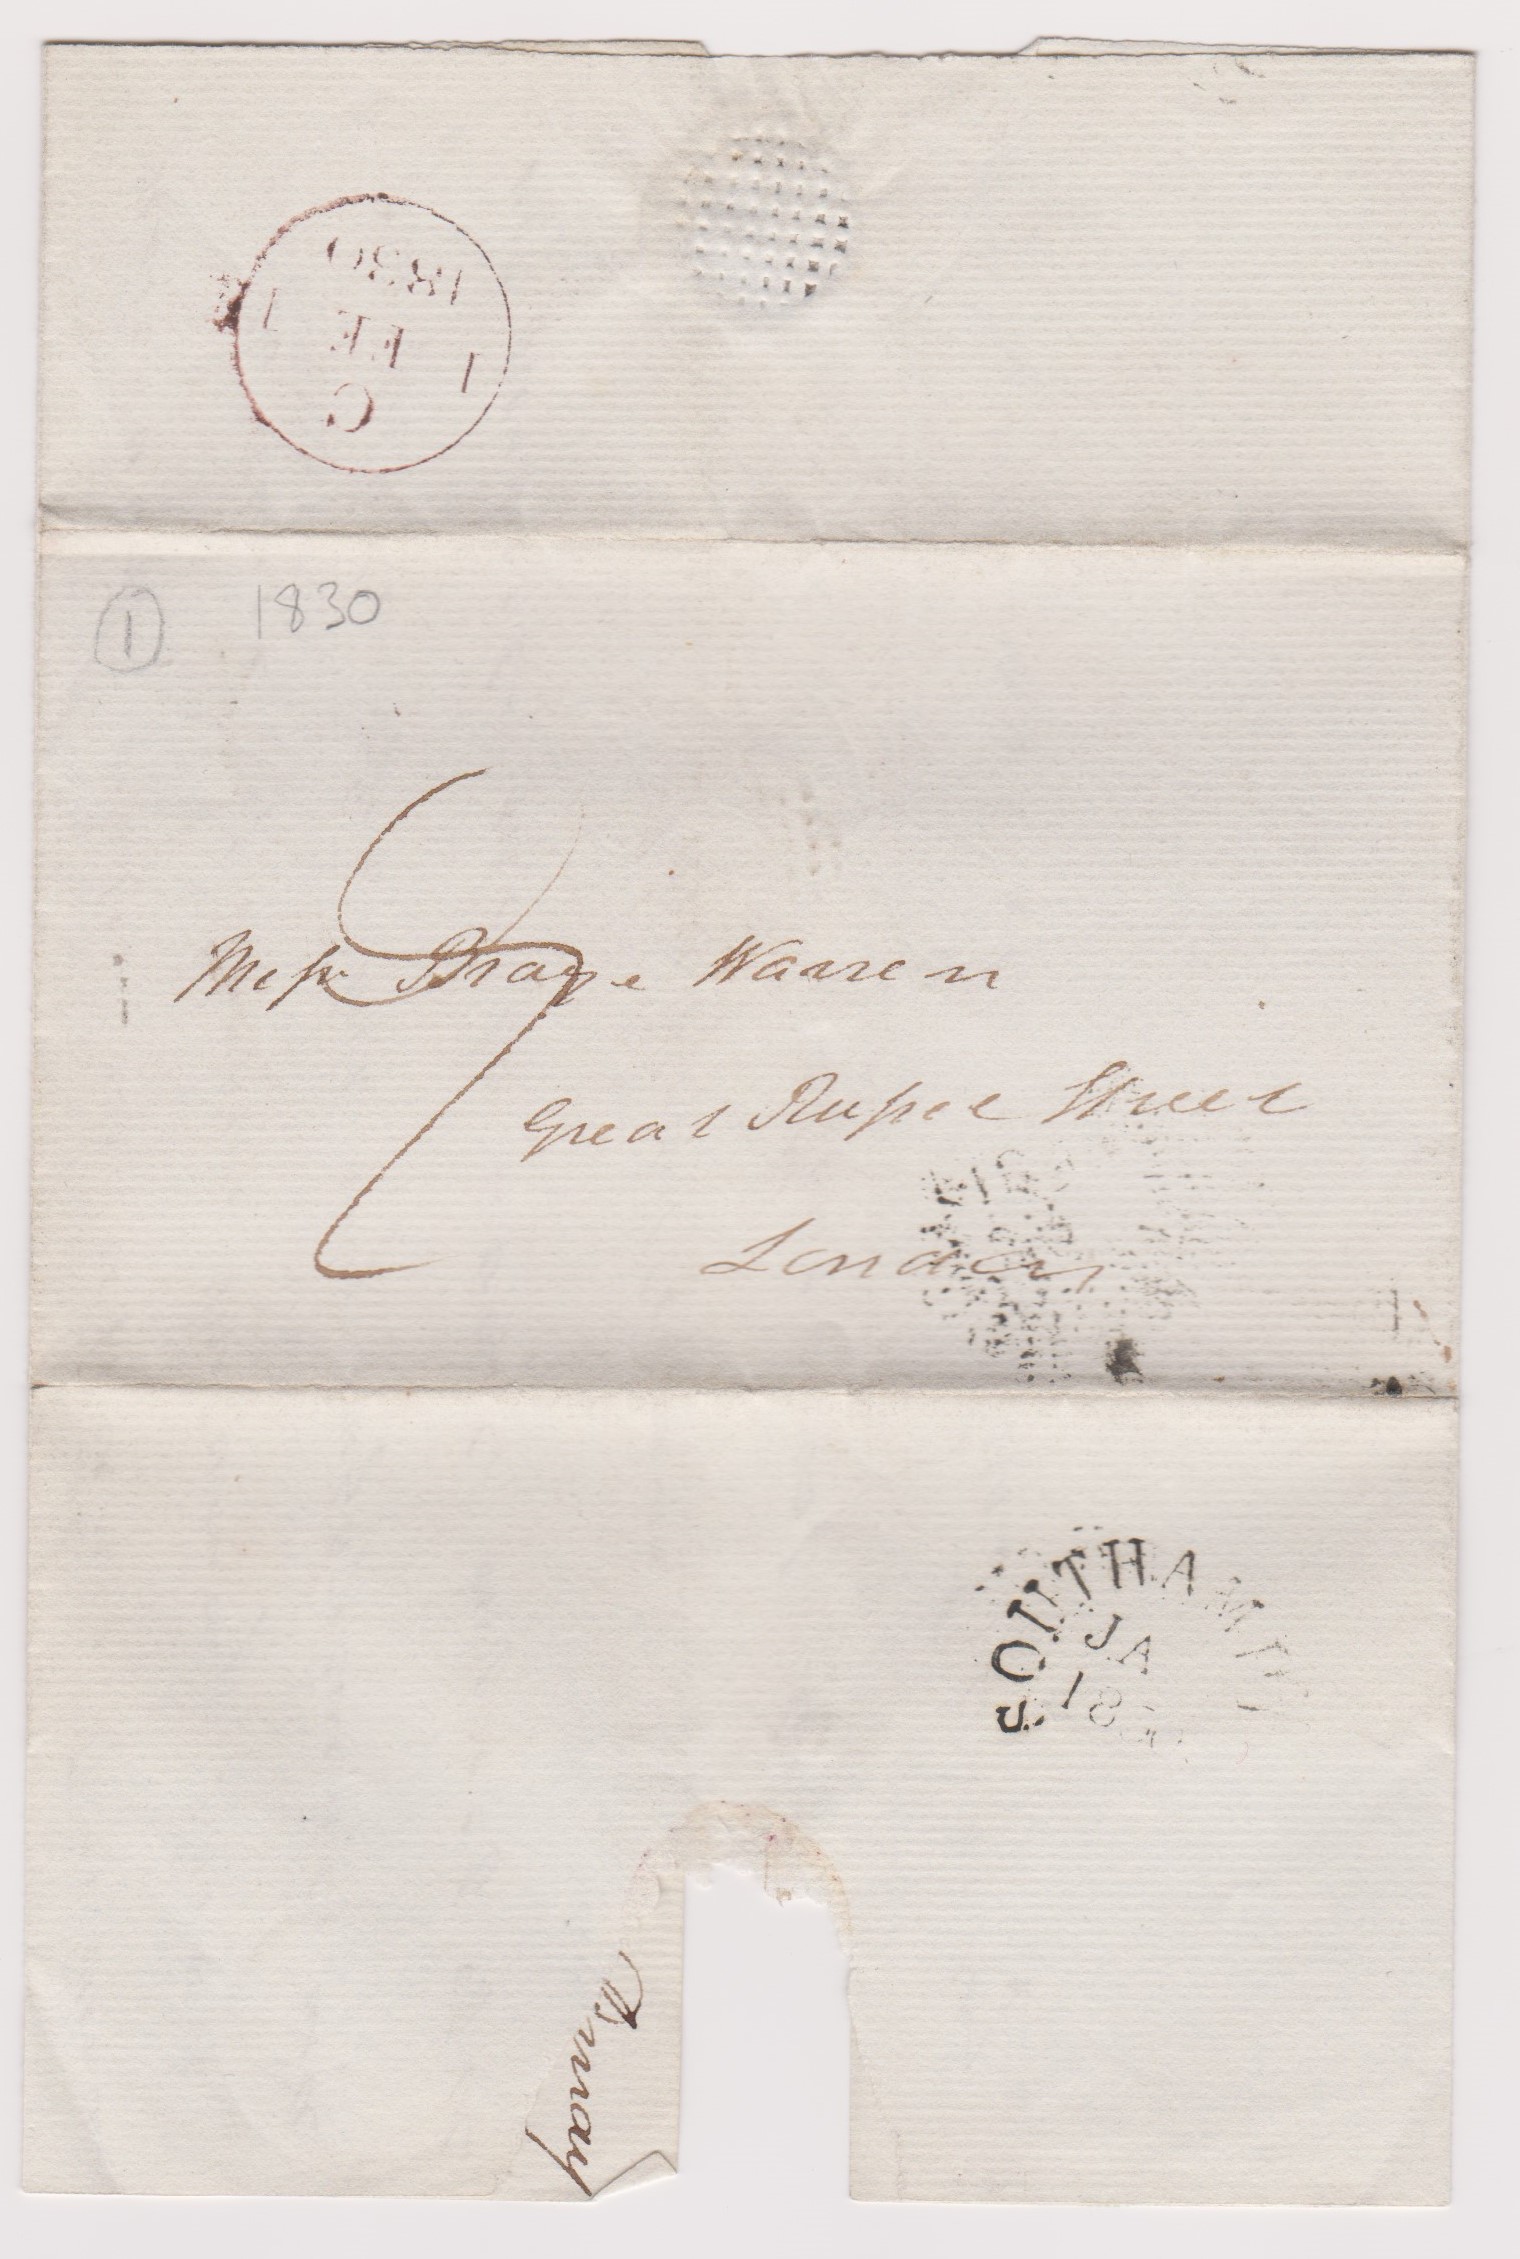 Great Britain 1830-Postal History EL dated 30.1.1830 Southampton posted to London-manuscript postage